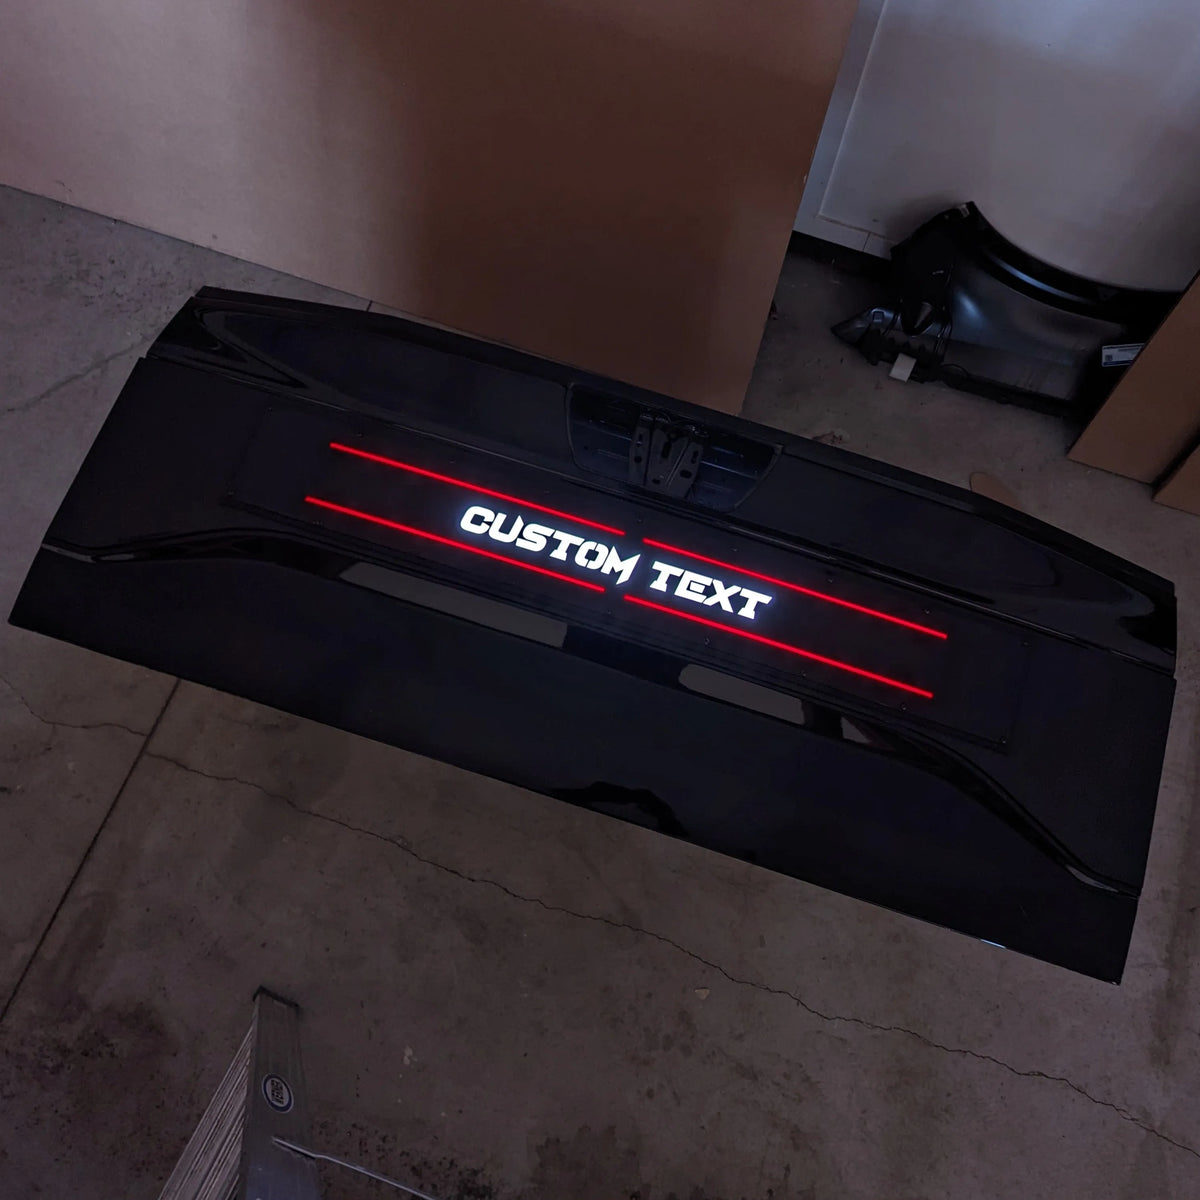 Custom Text LED Tailgate Applique - Fits 2015-2020 F150®